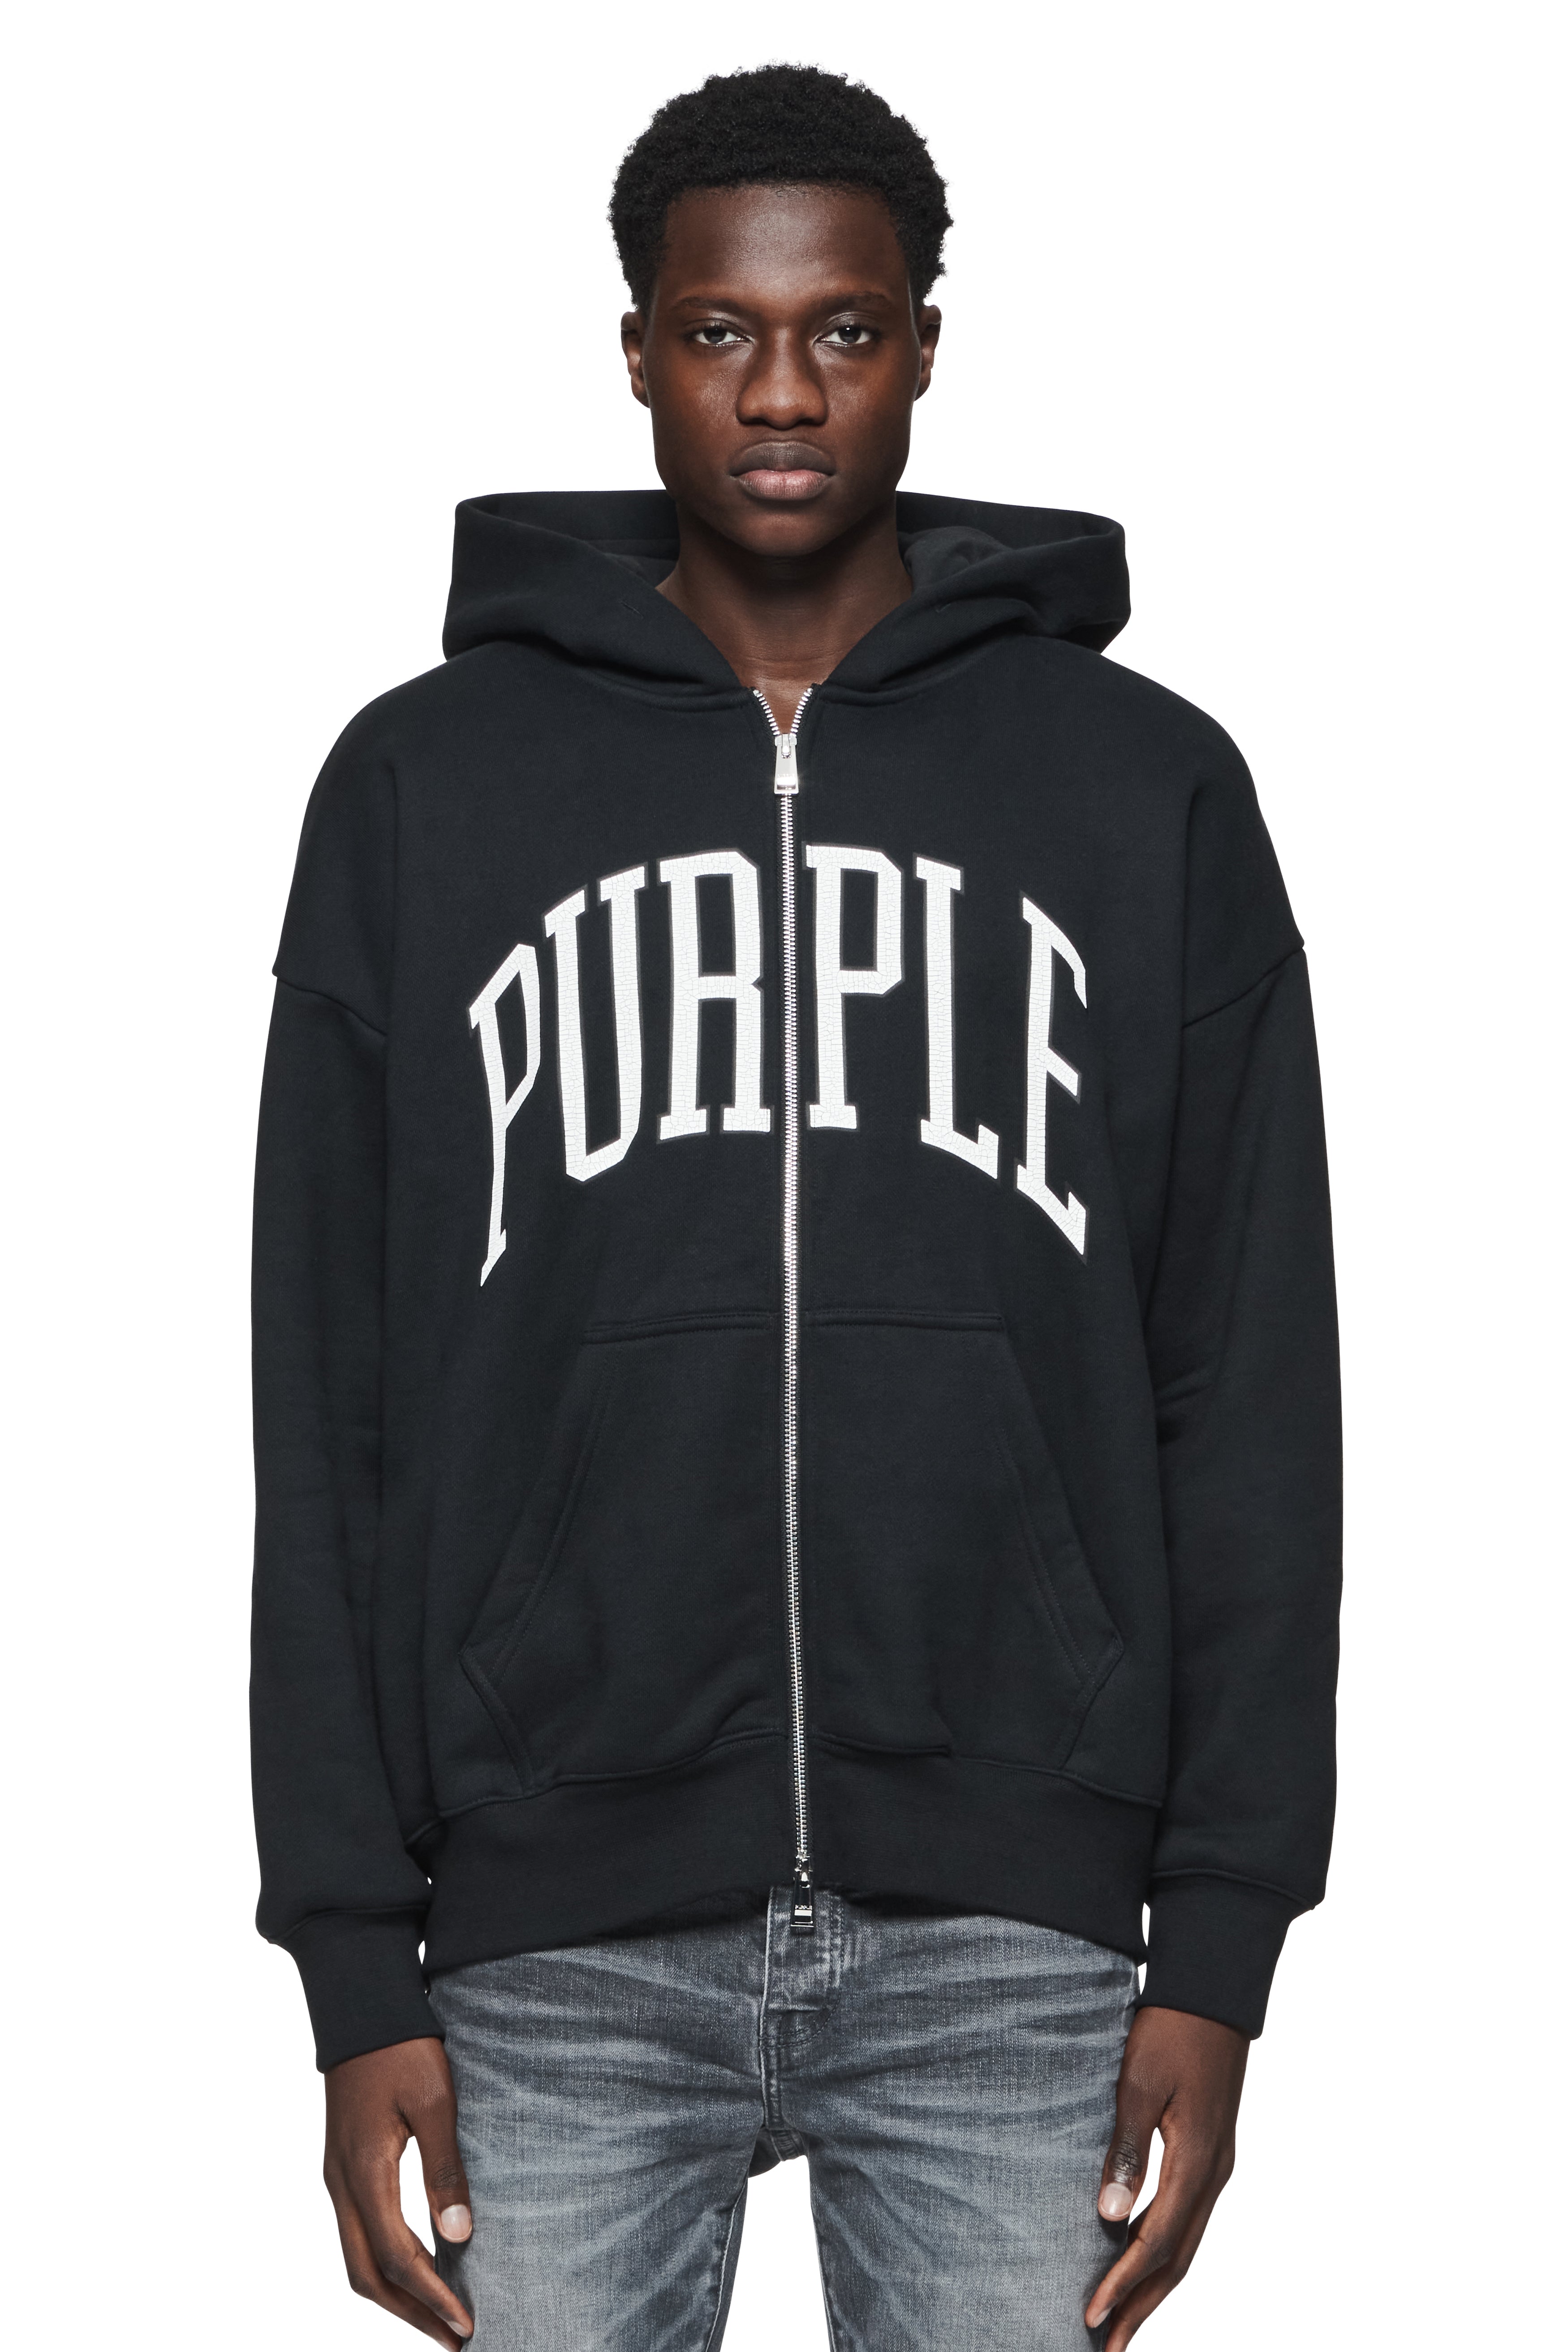 Brand New Kodone Purple Hoodie (Limited Release) A/R feature Size Large